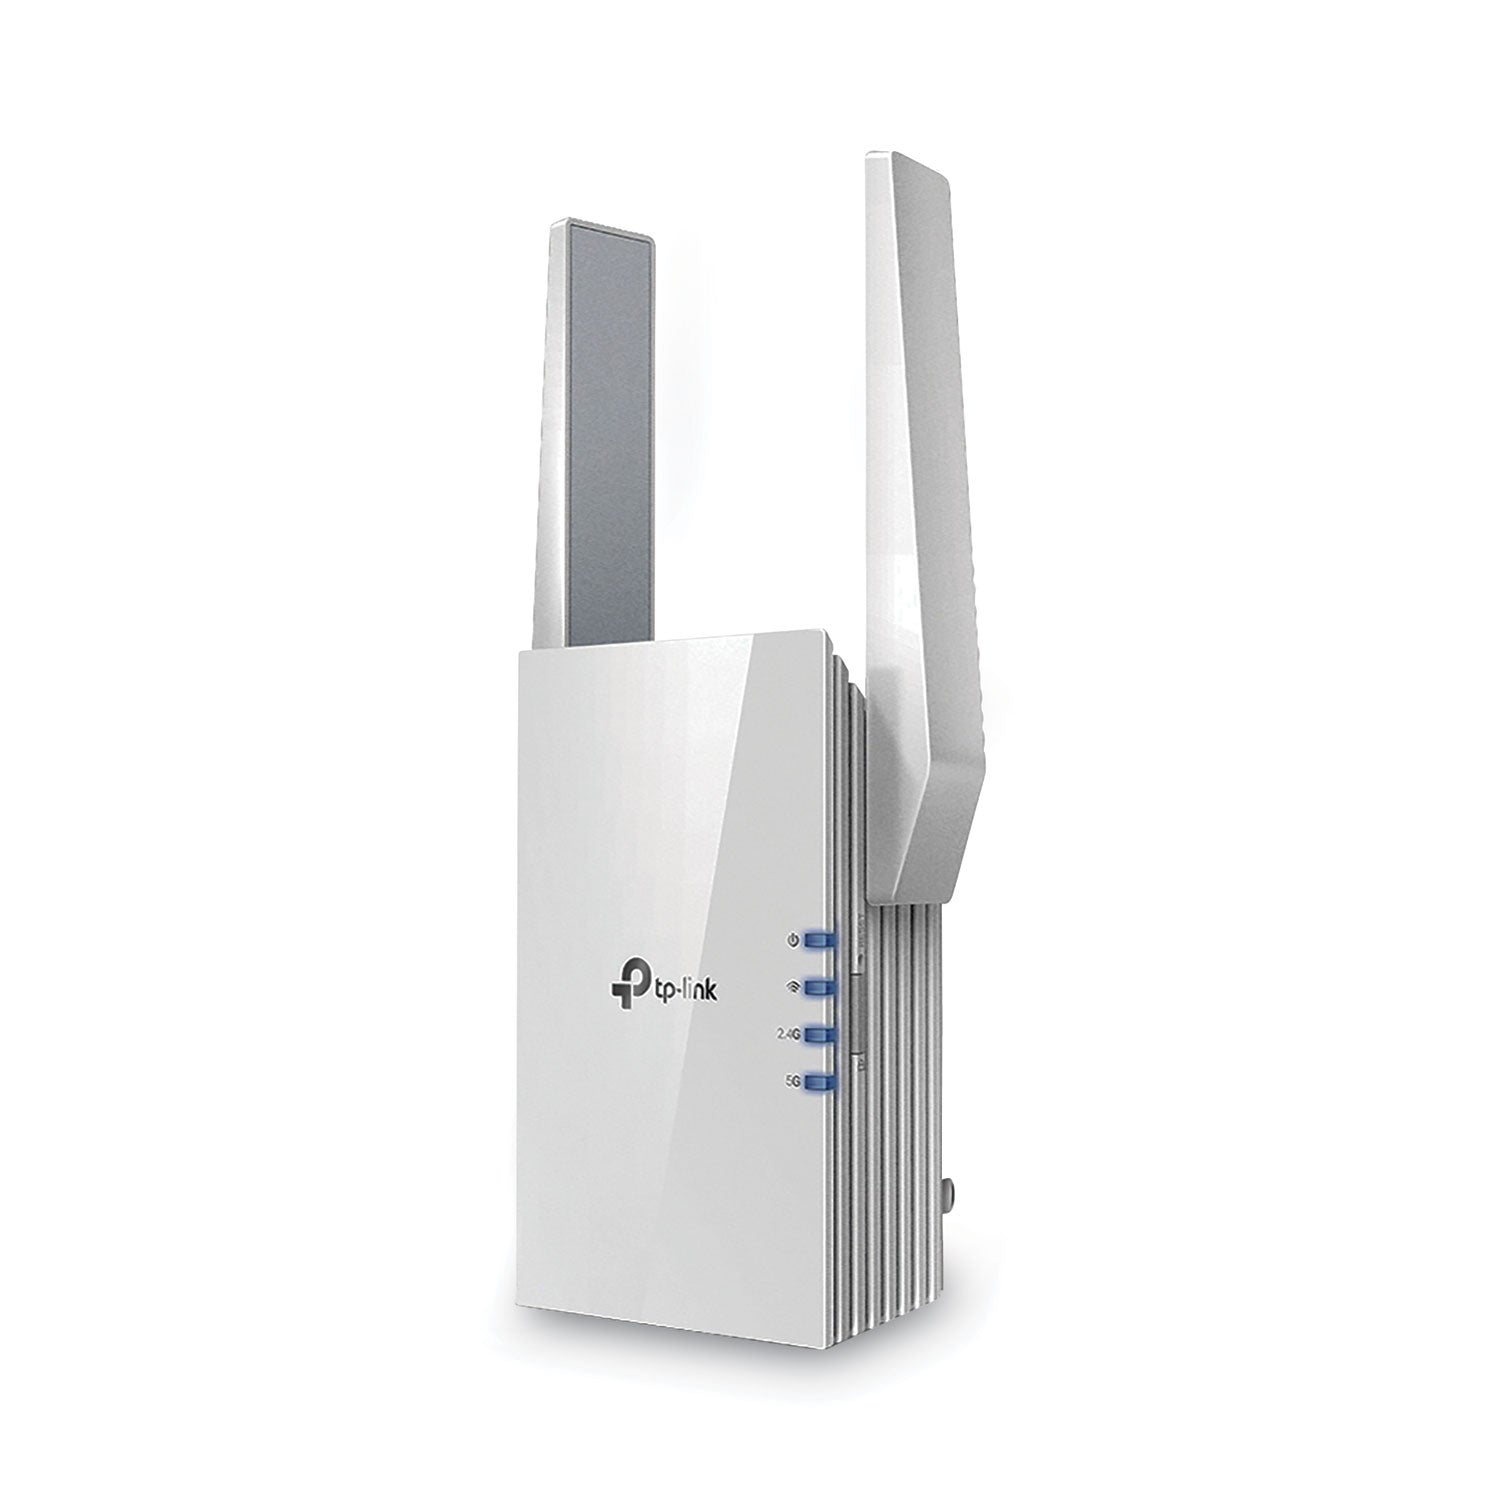 tp-link-ax1500-re505x-1500mbps-wi-fi-dual-band-range-extender-1-port-dual-band-24-ghz-5-ghz_tplre505x - 1